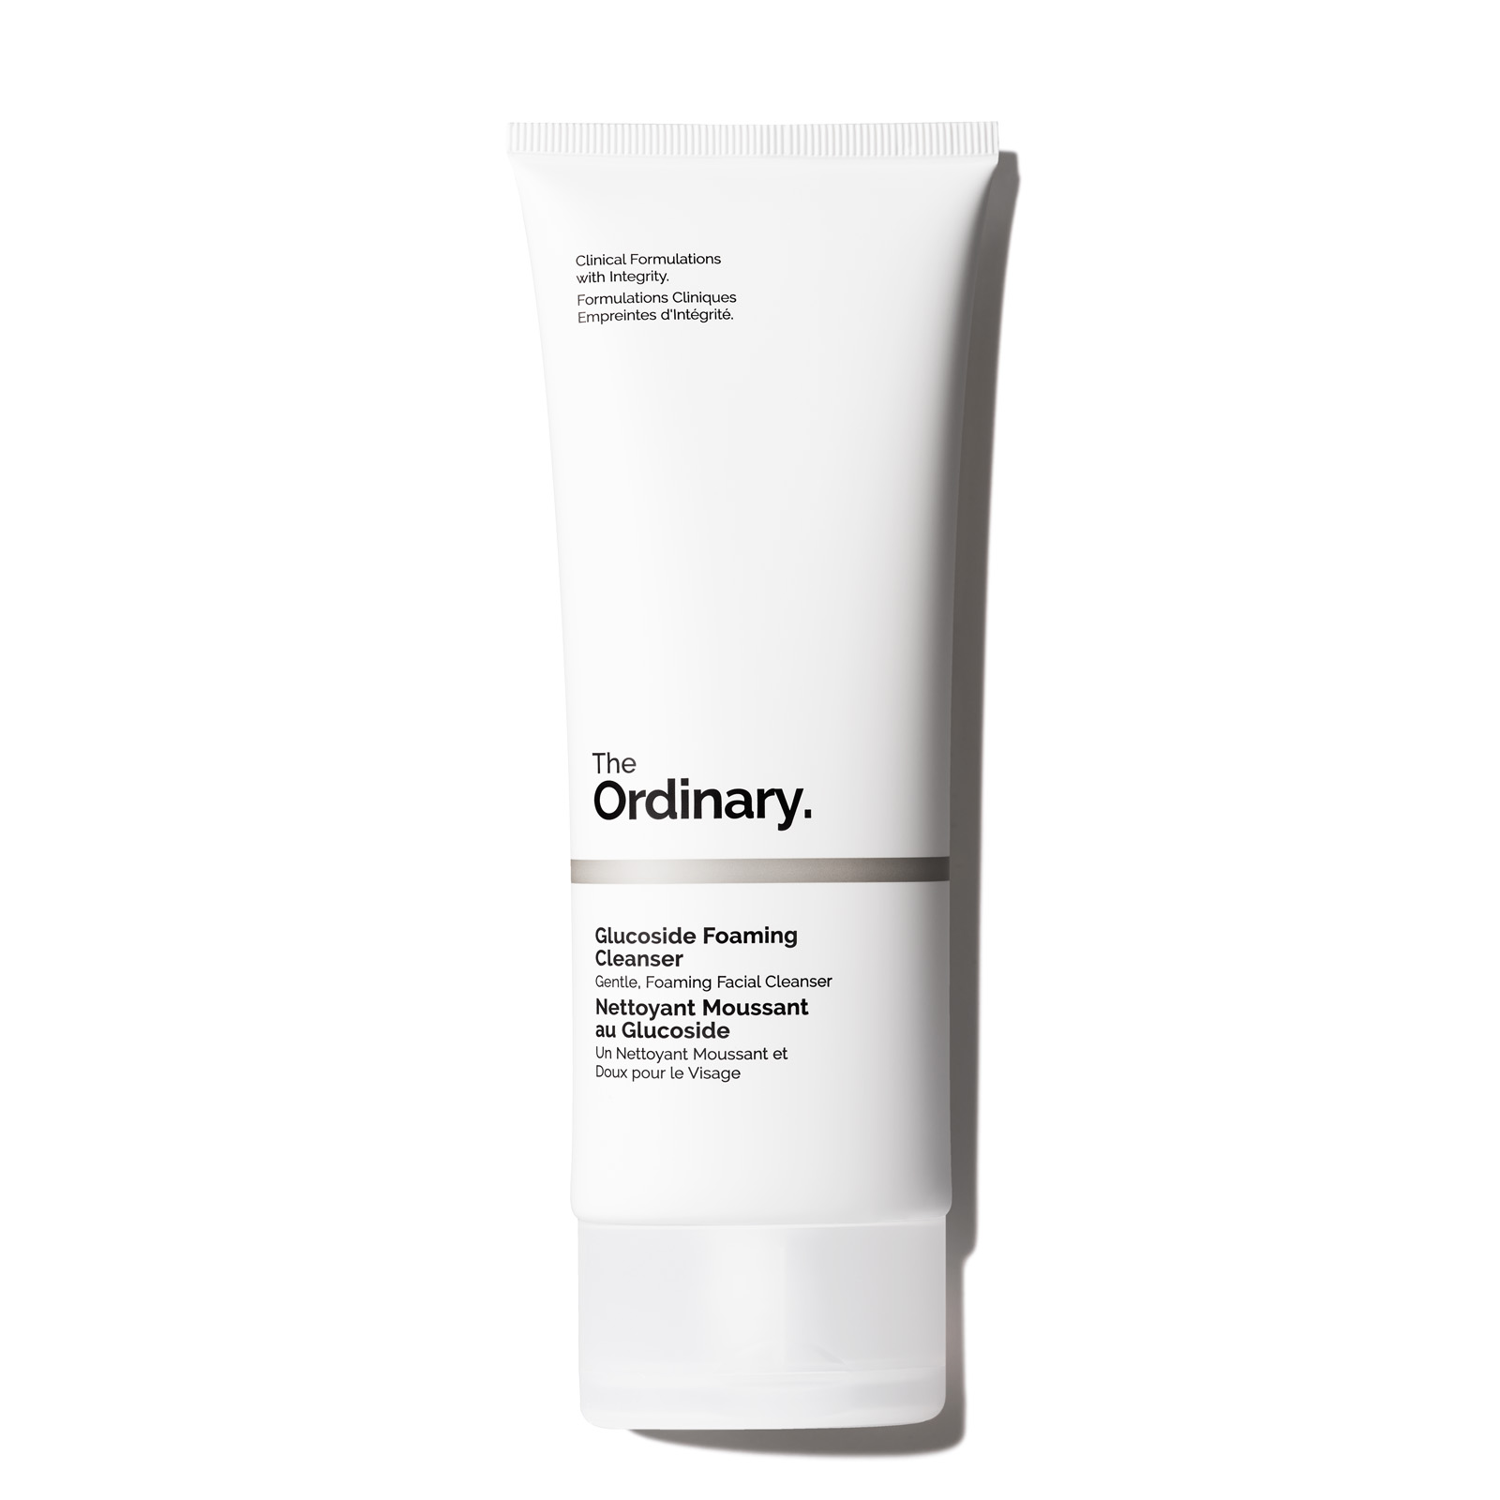 The Ordinary_Glucoside Foaming Cleanser_150ml_13.40EUR